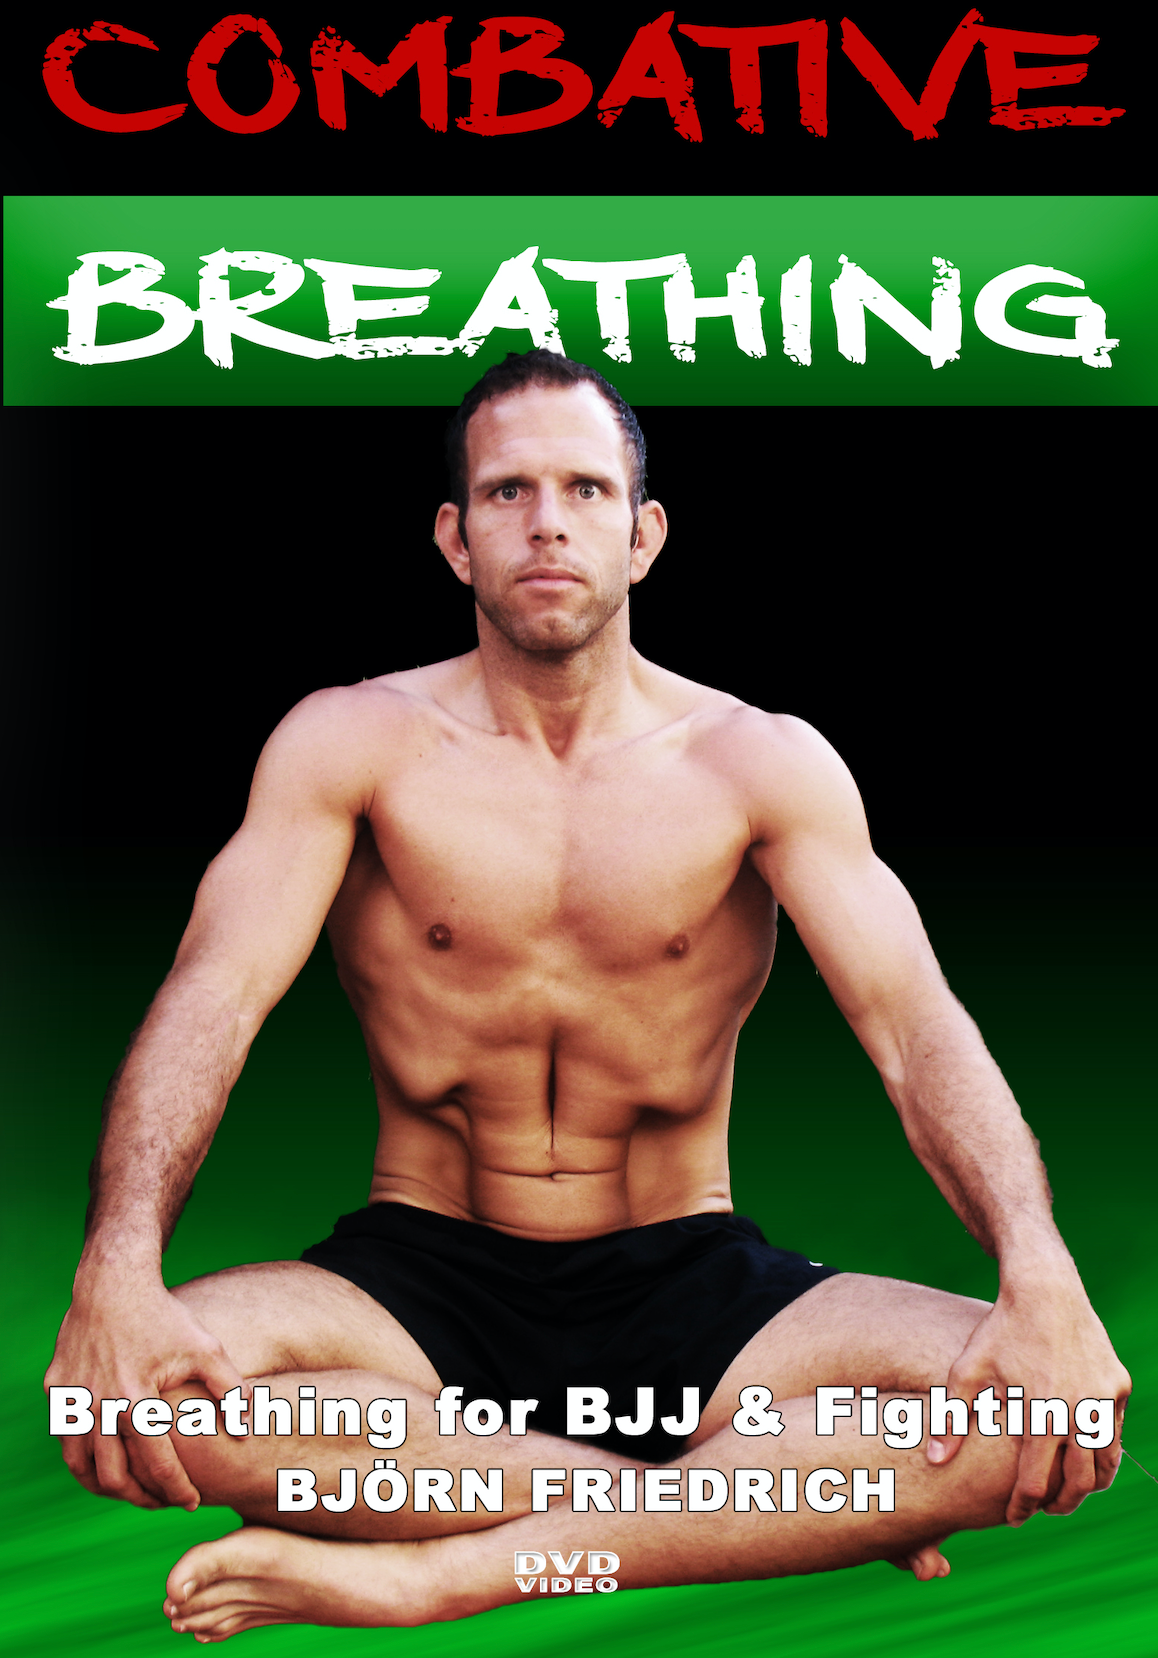 Combative Breathing: Breathing for BJJ & Fighting 3 DVD Set with Bjorn Friedrich - Budovideos